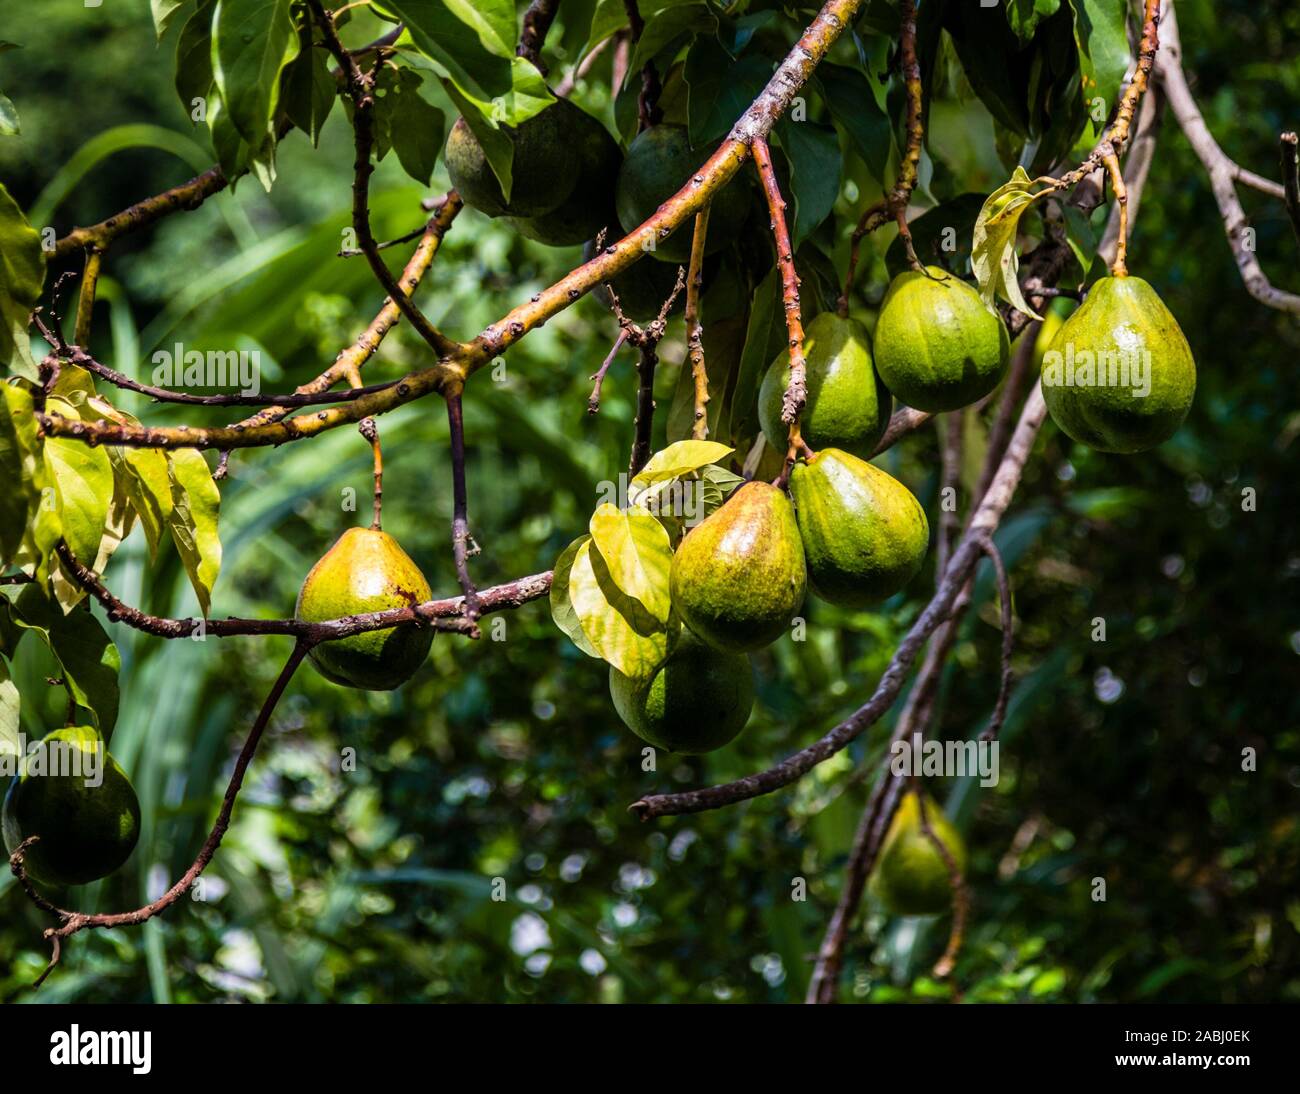 Nutmegs on the Tree in Concord, Grenada Stock Photo